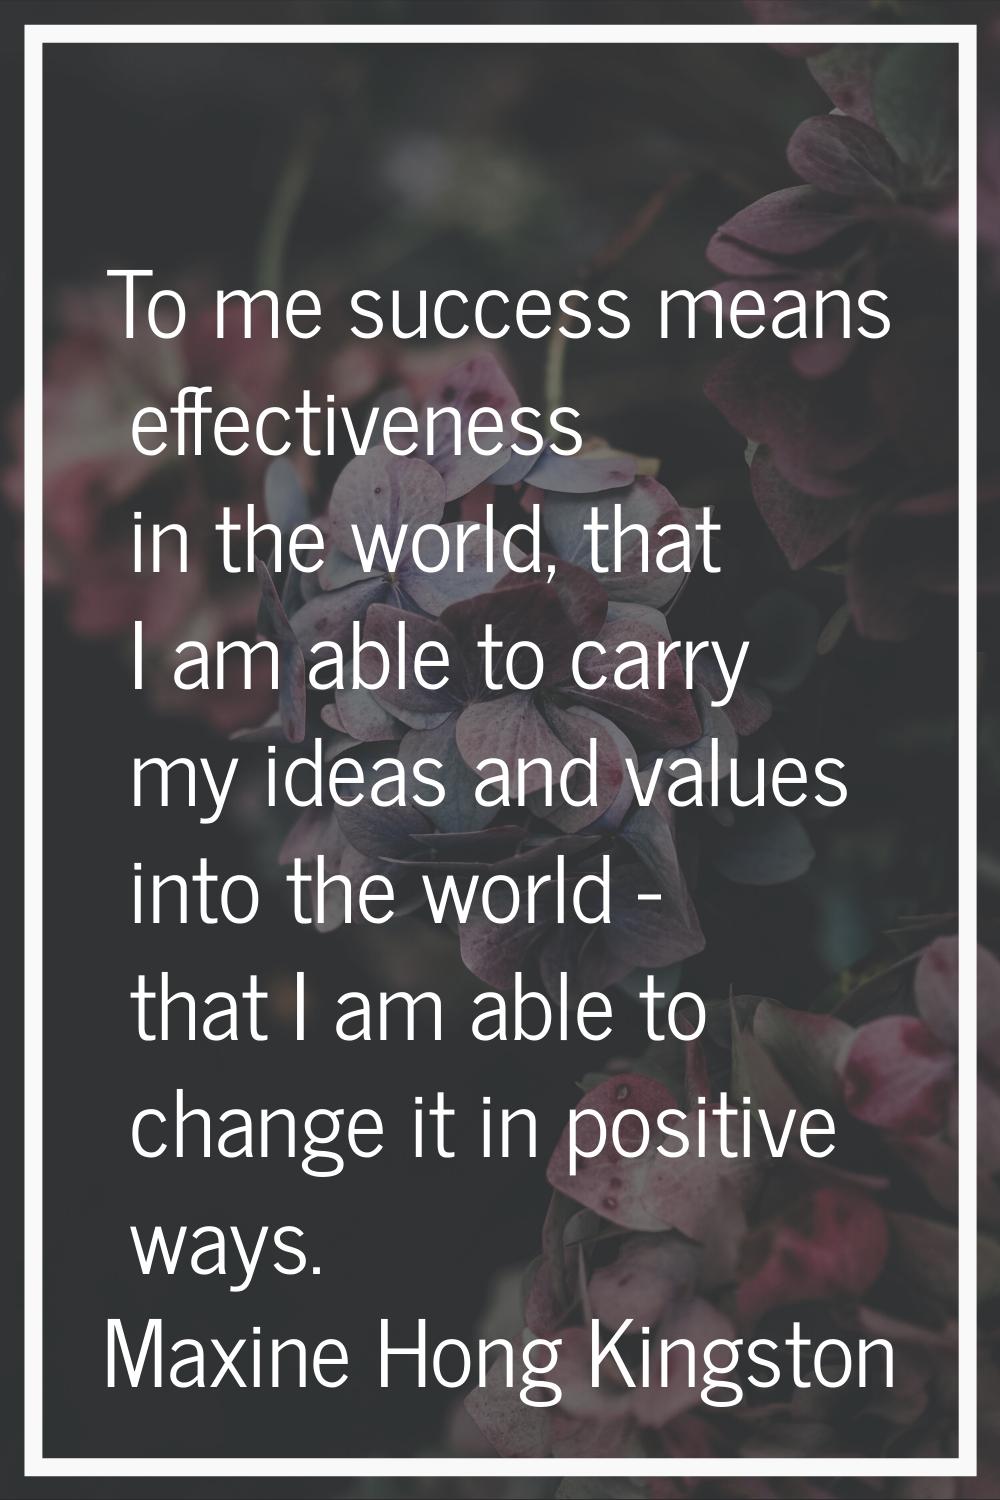 To me success means effectiveness in the world, that I am able to carry my ideas and values into th